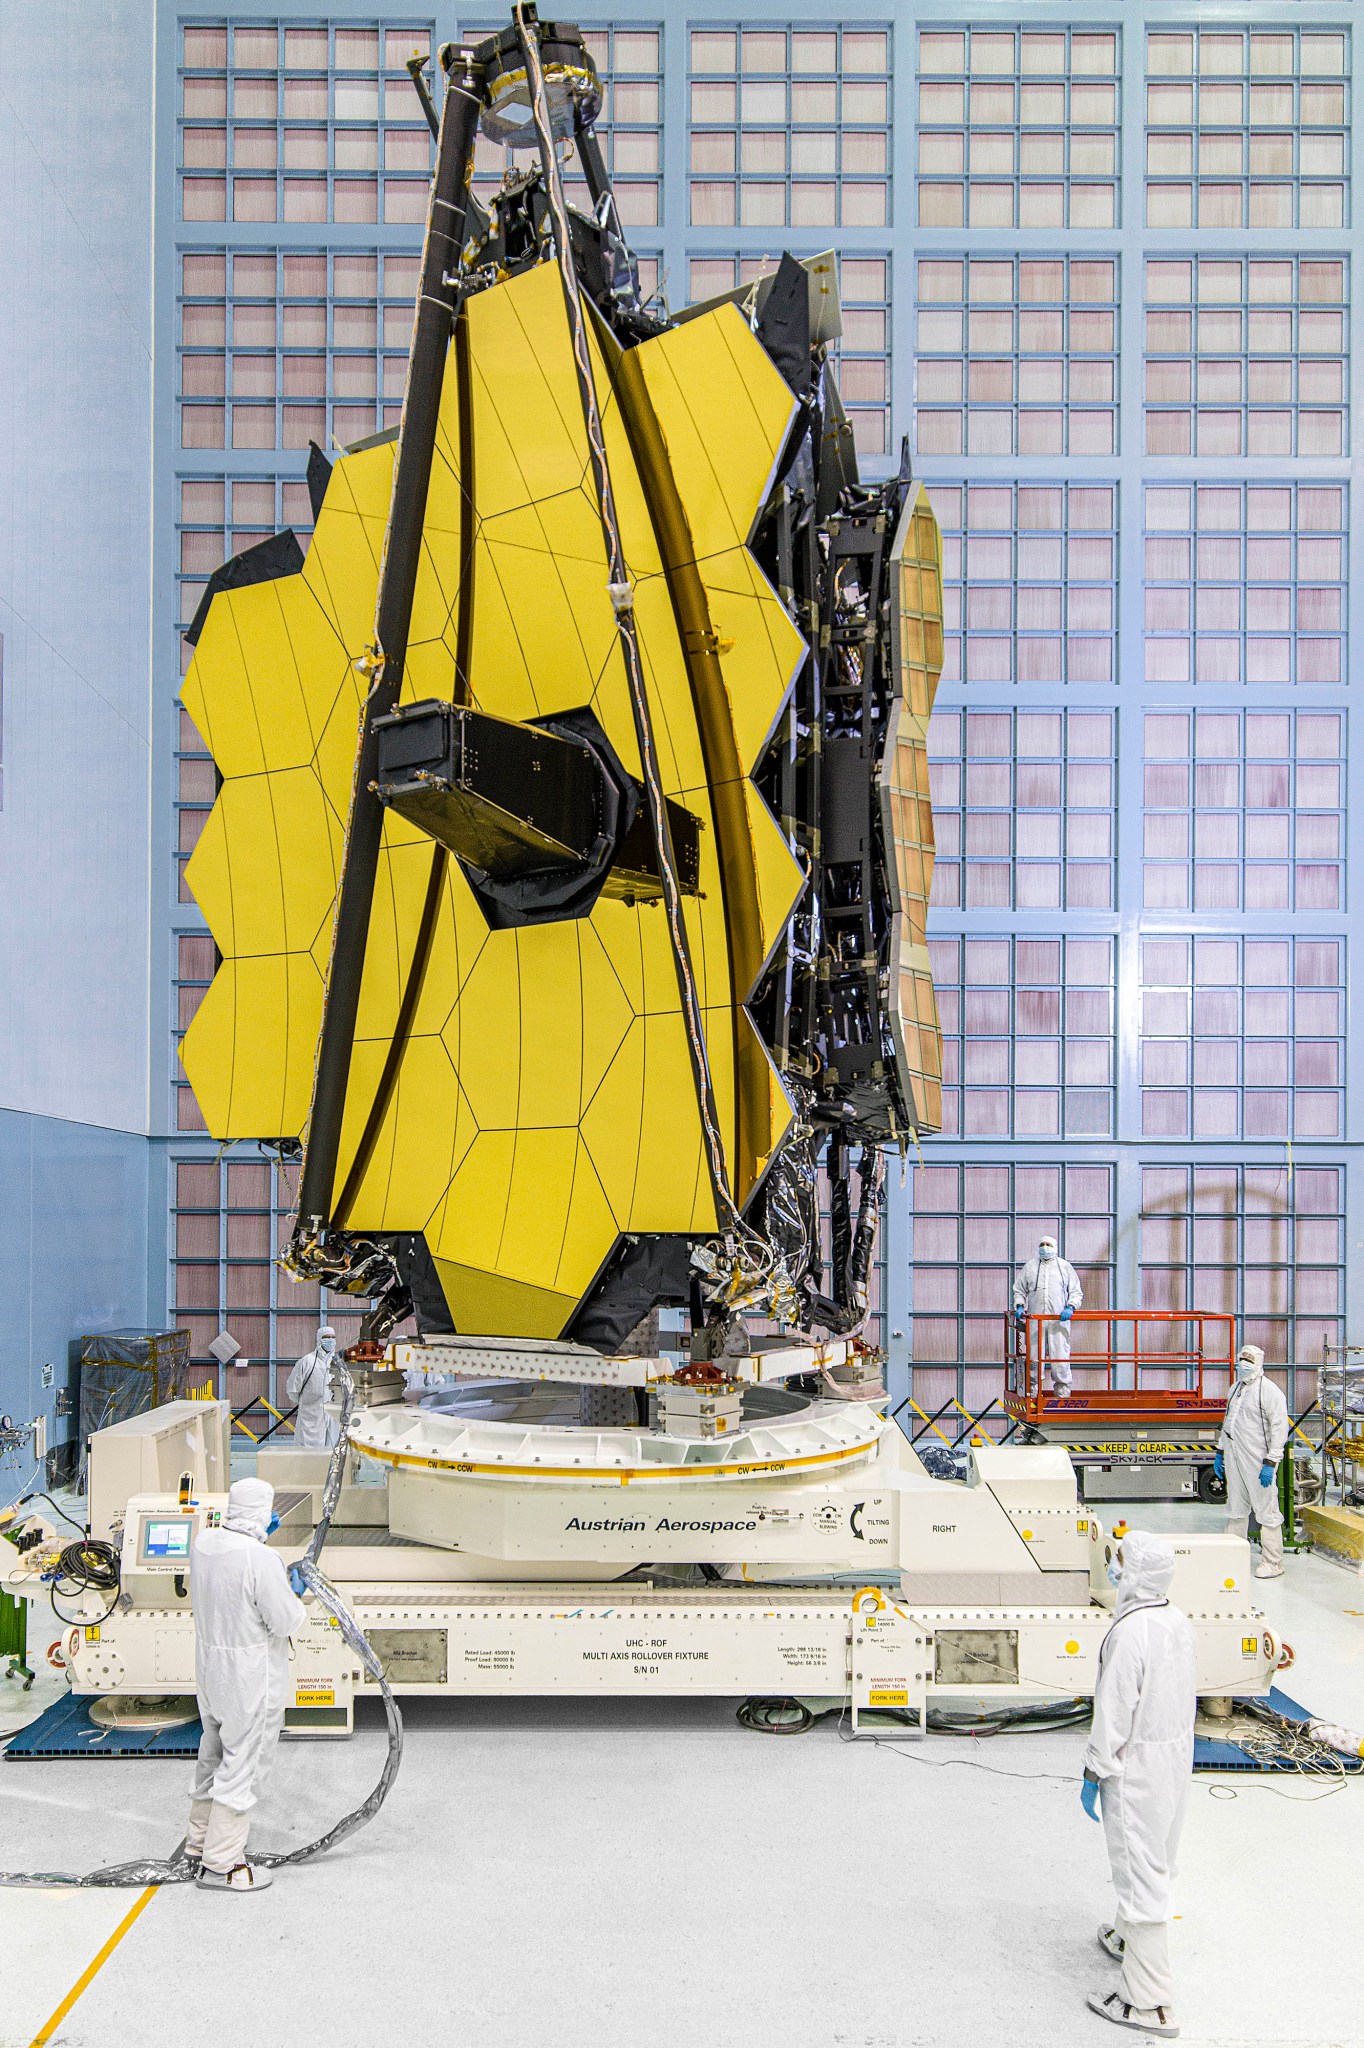 The James Webb Space Telescope mirrors upright on a white stand in the NASA Goddard cleanroom. The 3 mirrors on the right “wing” are folding back like a leaf on a drop-leaf table. The telescope has 18 golden hexagonal segments. The secondary mirror support structure, made of three thin black lines, is folded and the secondary mirror sits atop this folded tripod. There are 5 people in white cleanroom suits supervising the folding maneuver. One of them is on a red lift at the back right. There is a wall of HEPA filters behind the telescope.